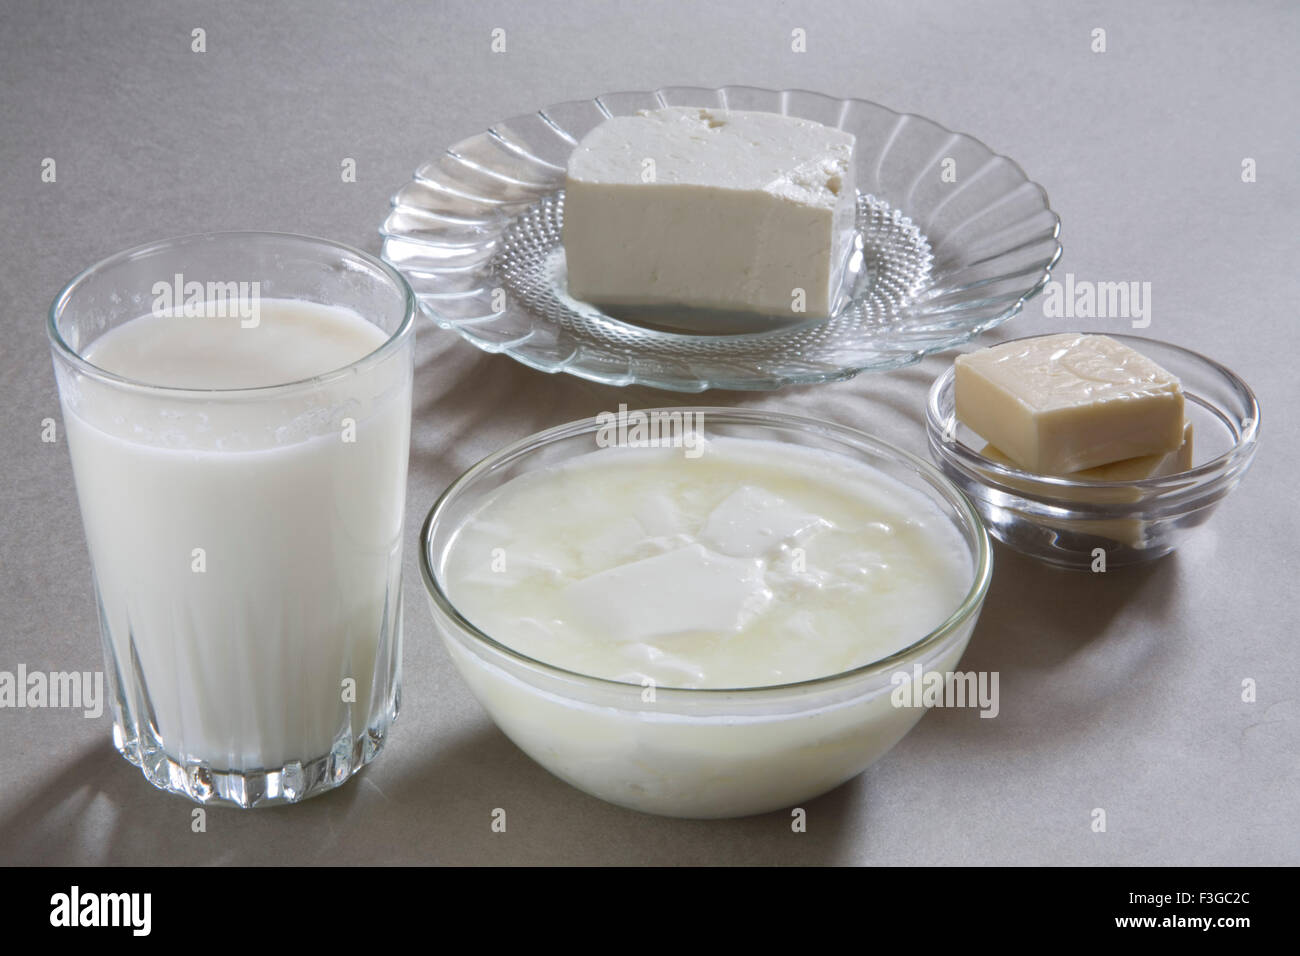 Milk curd yogurt dahi cottage cheese paneer and cheese made from milk or dairy product ; India Stock Photo